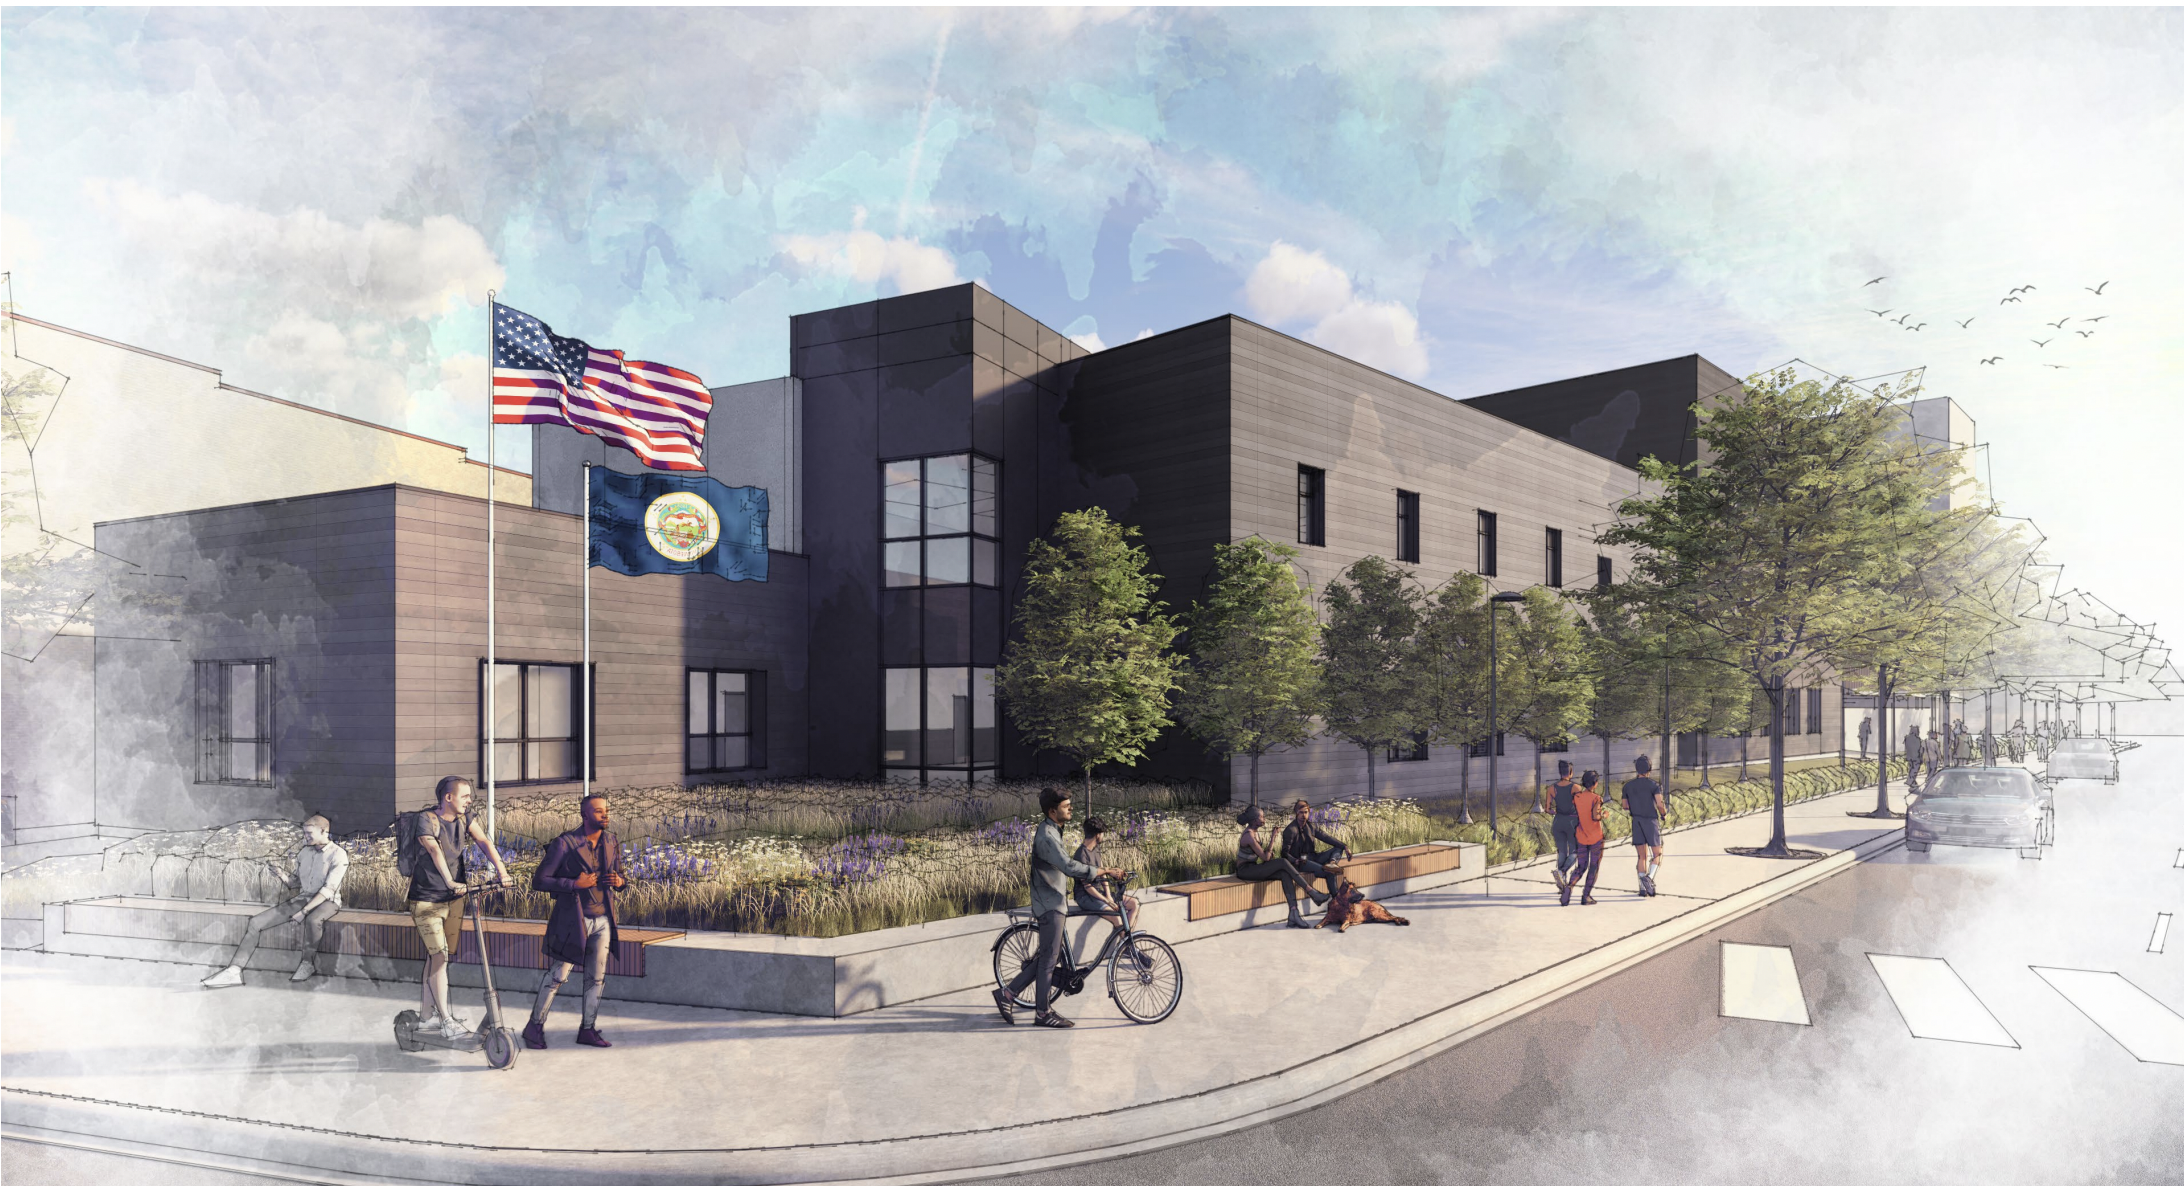 A rendering of a new brown, boxy police station in Minneapolis with trees and a flag poll